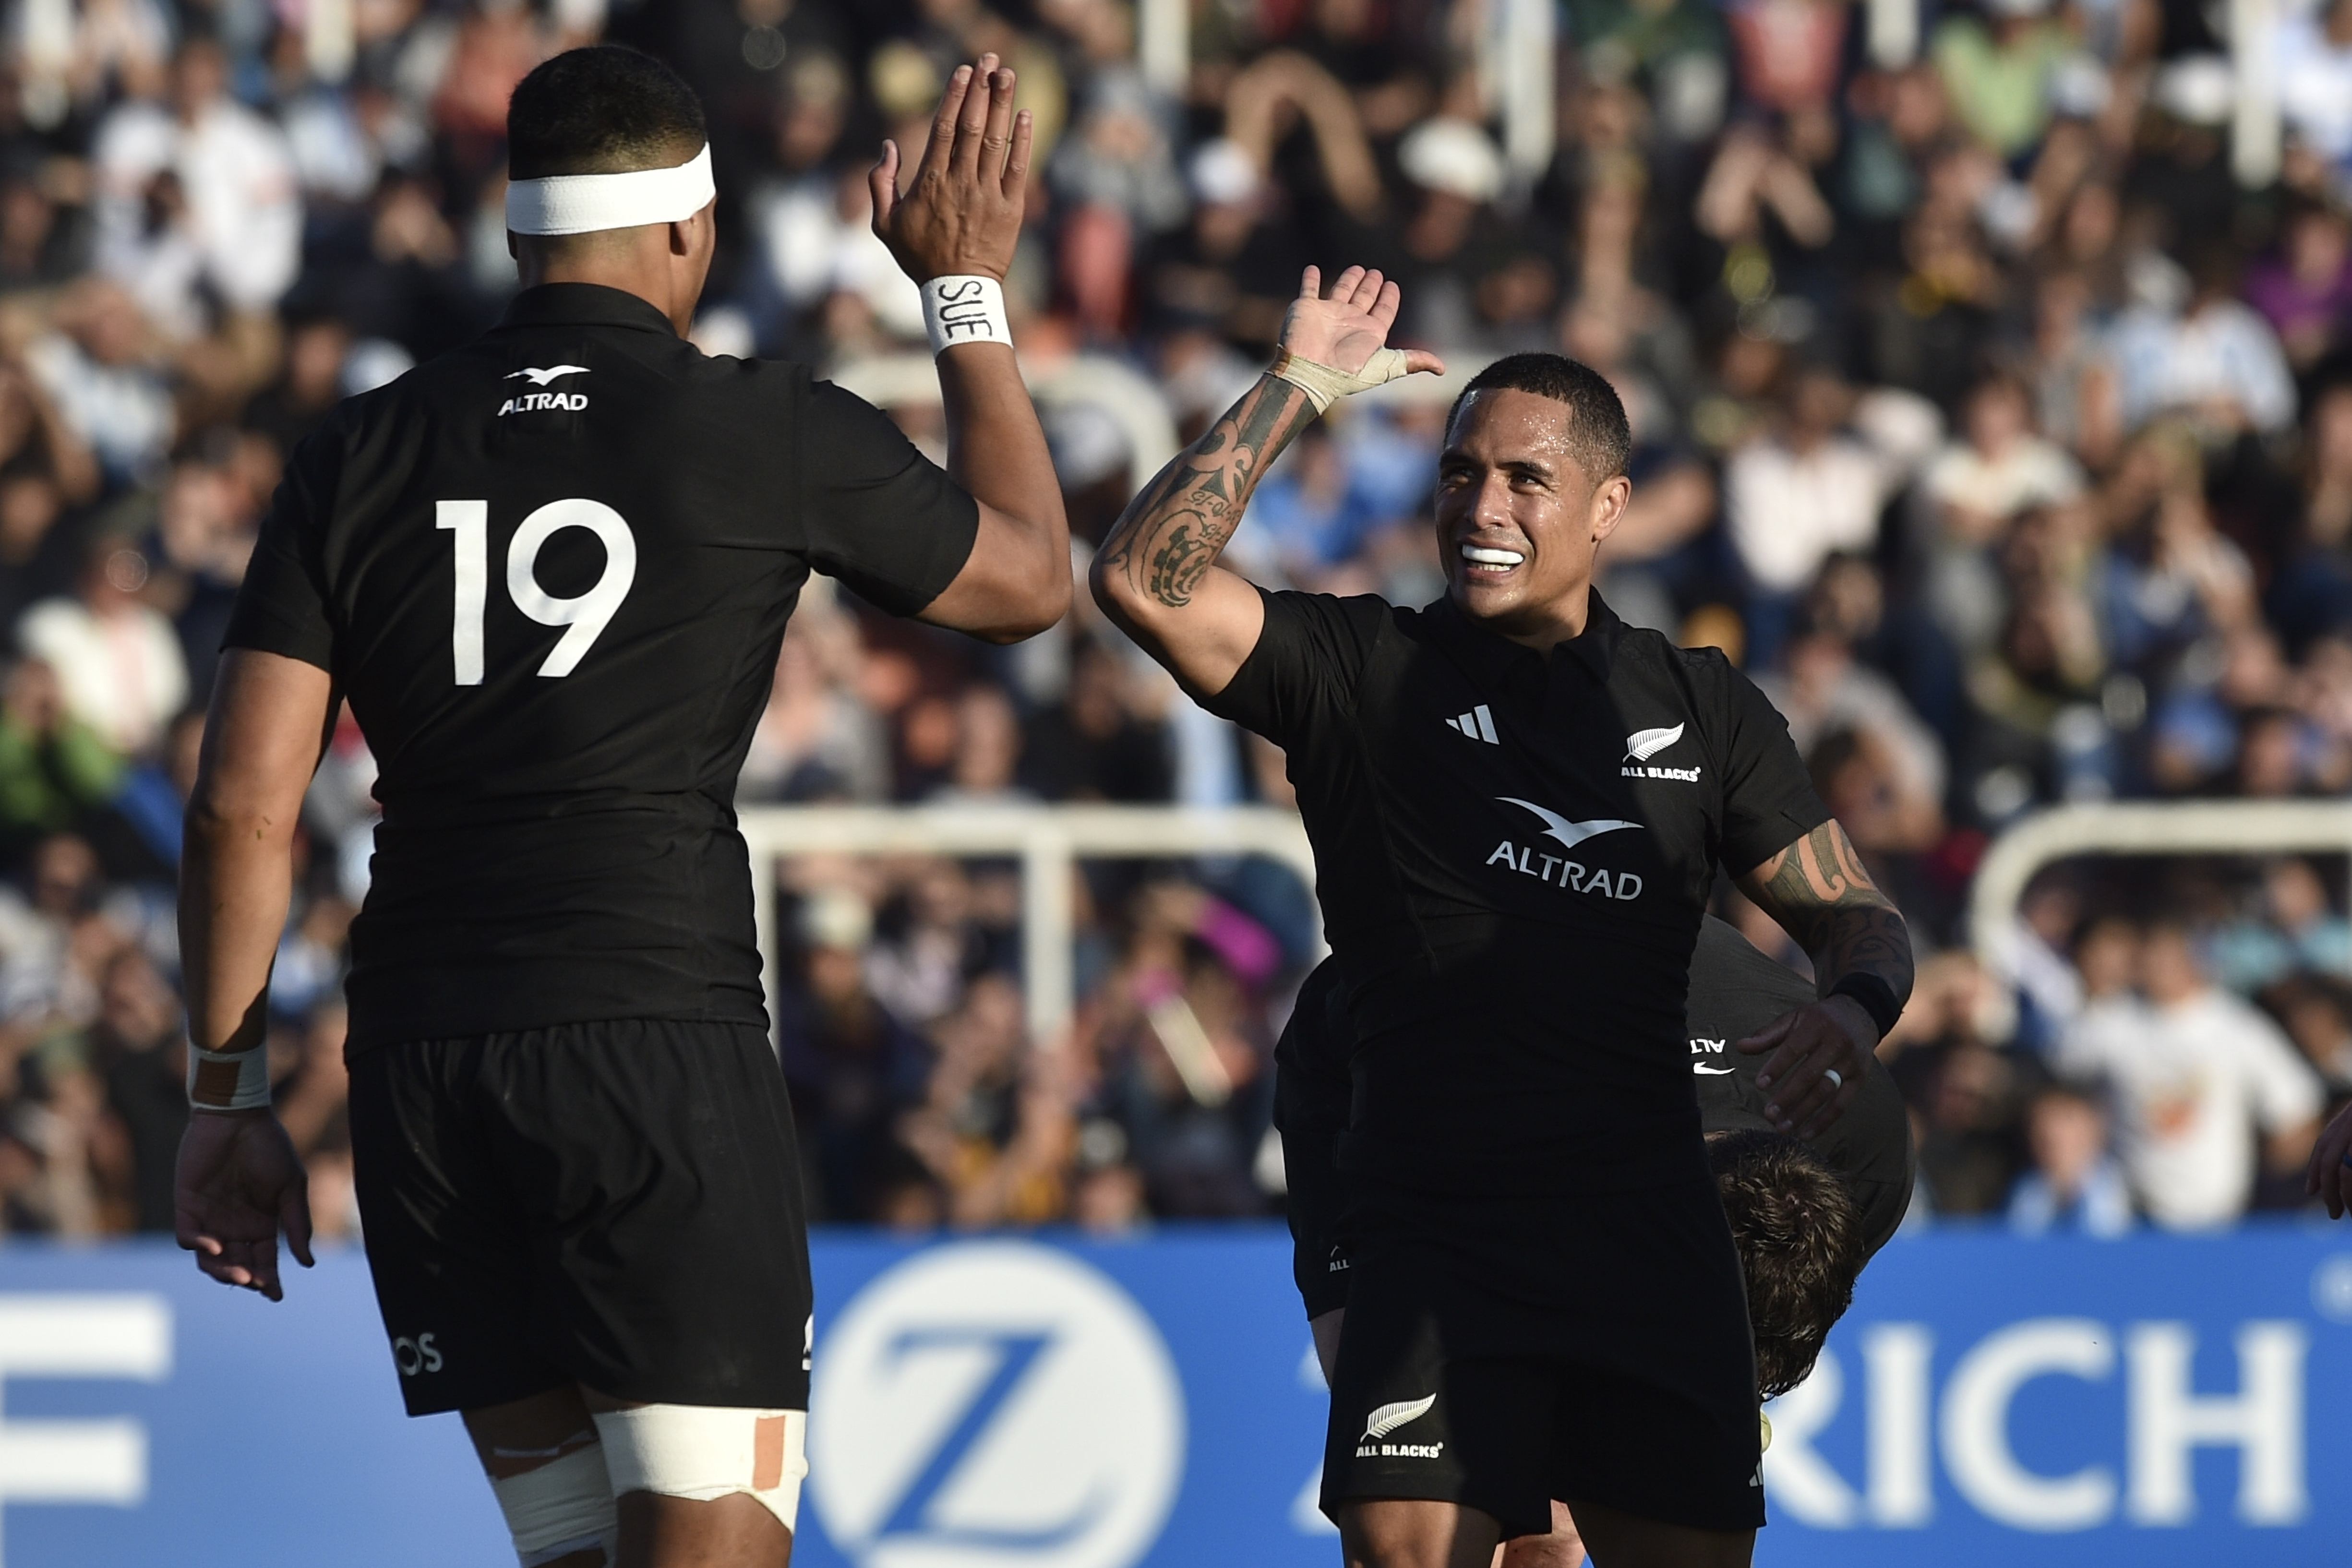 New Zealand PM Announces 'All Blacks' To Be Renamed 'Some Blacks